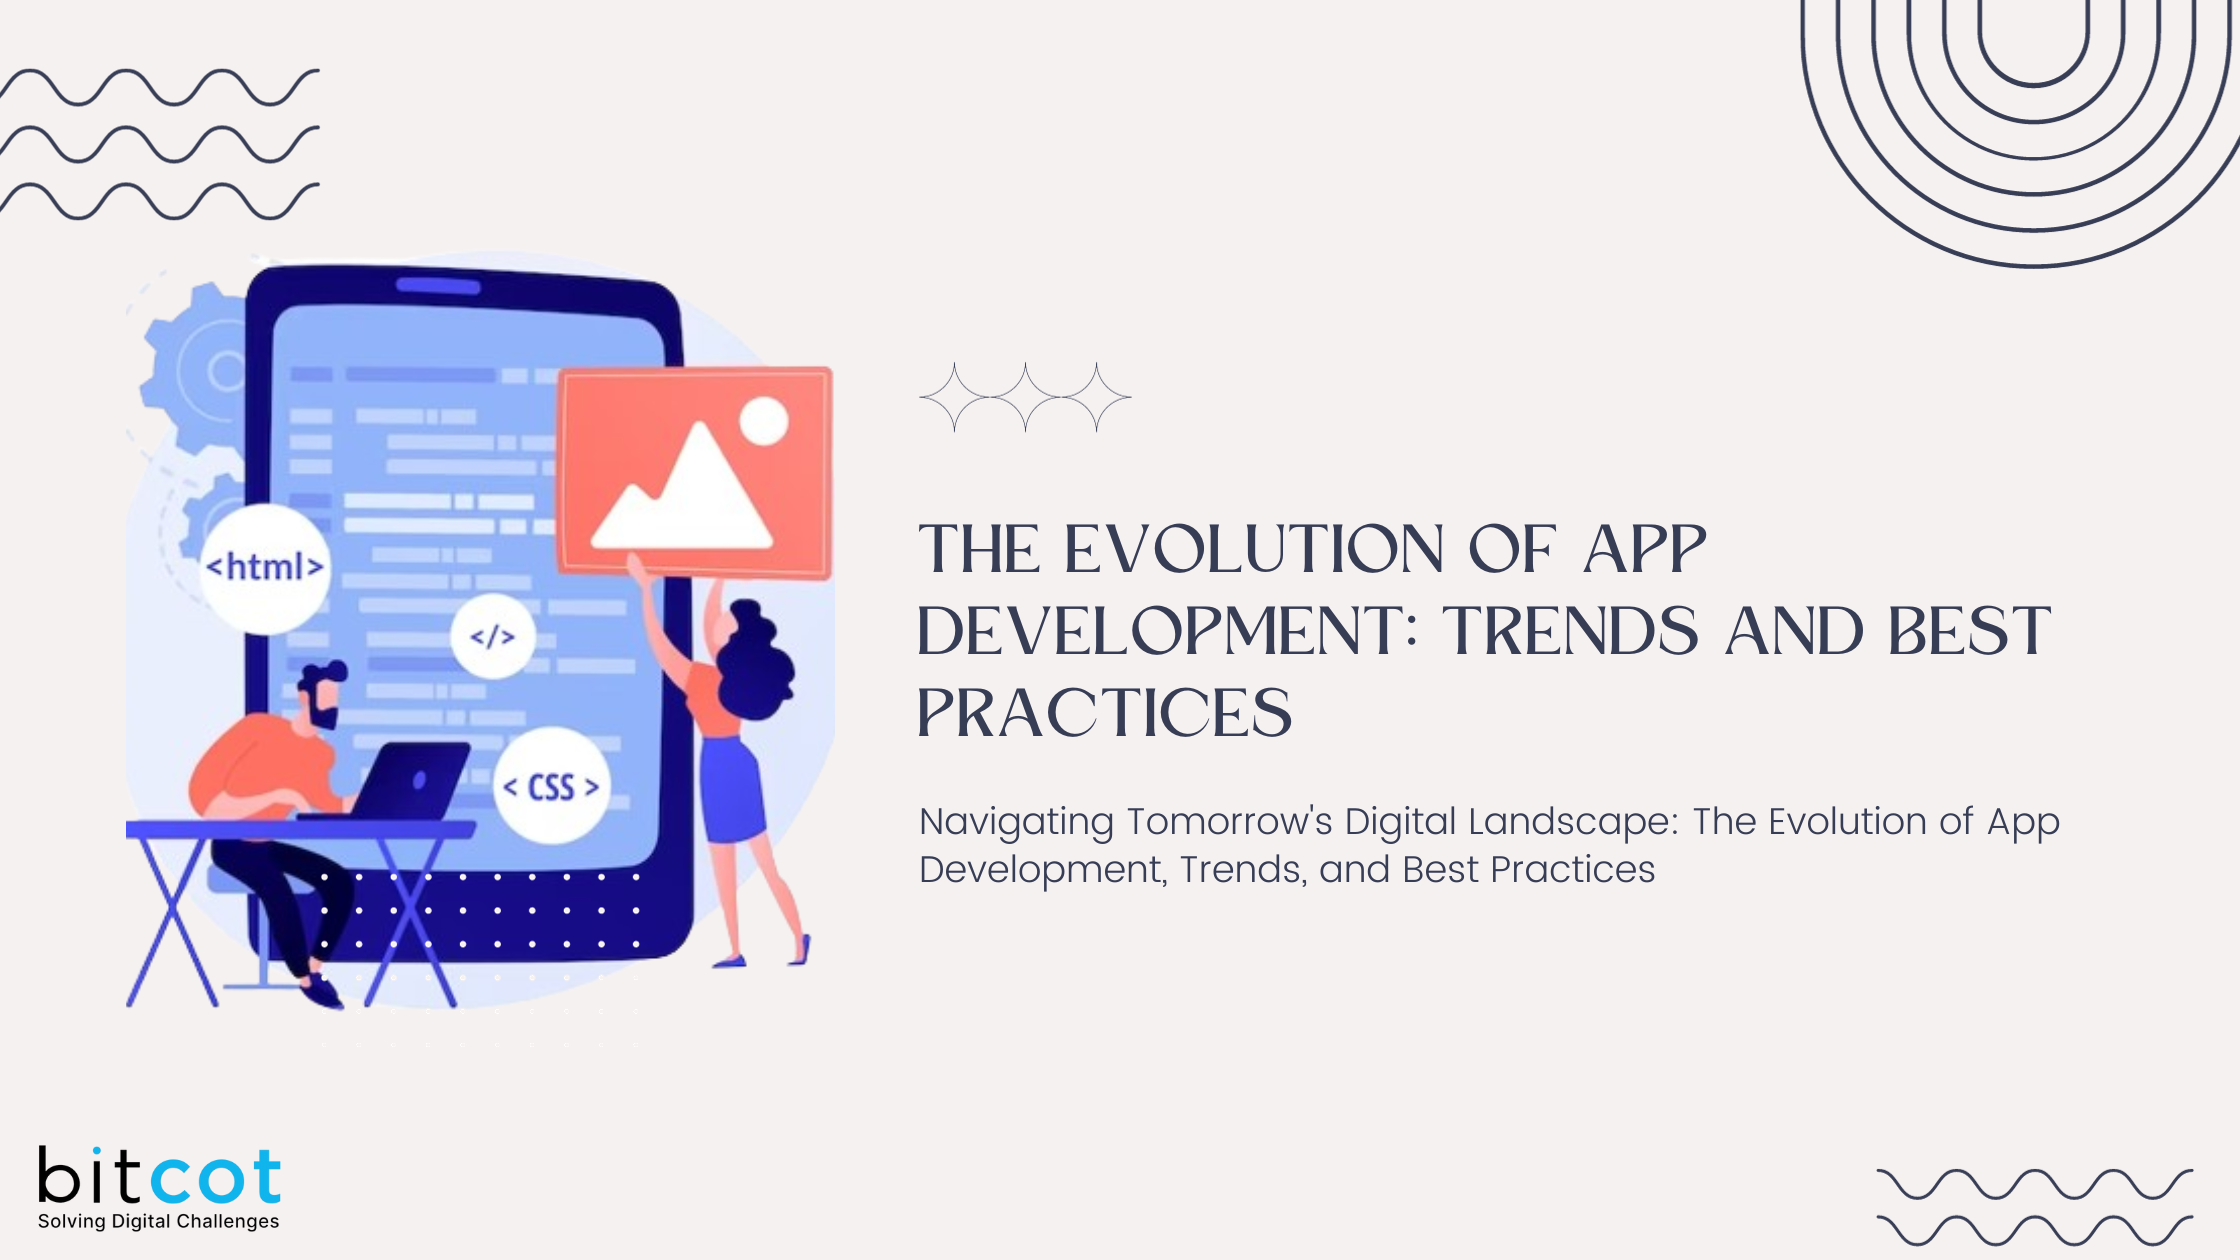 The Evolution of App Development Trends and Best Practices